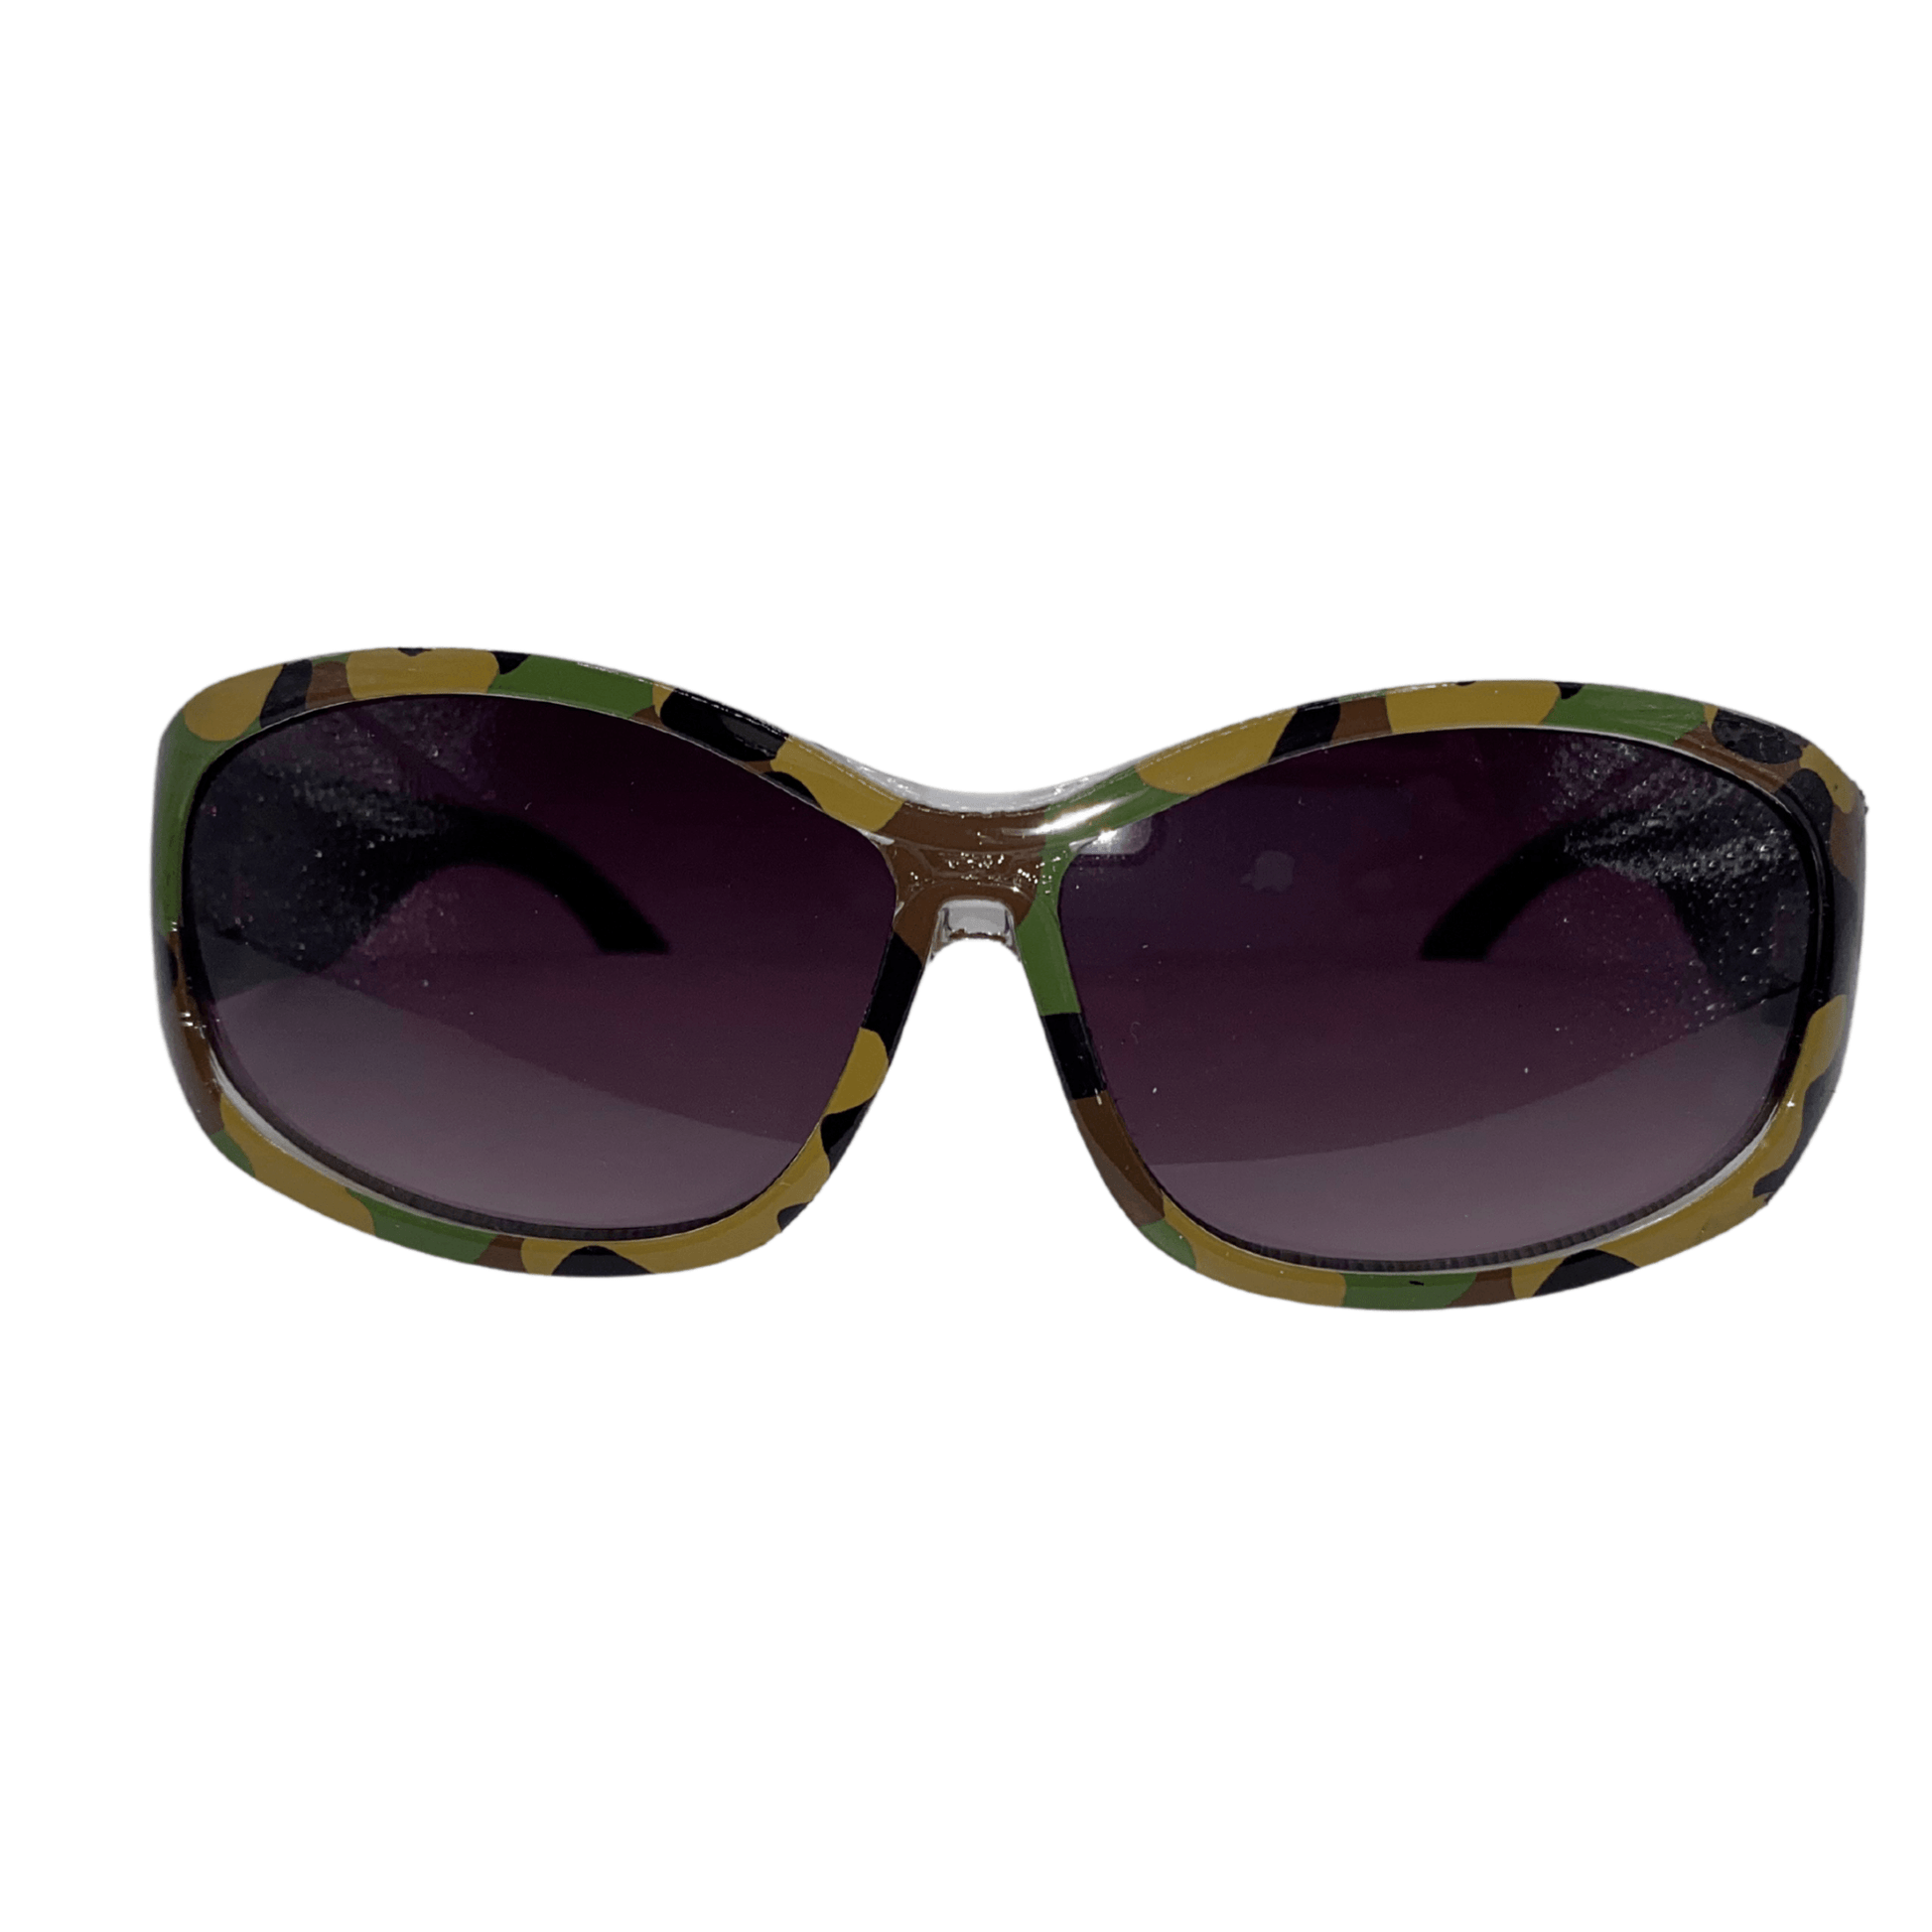 Be ready to block the sun with these green camouflage sunglasses with black arms.